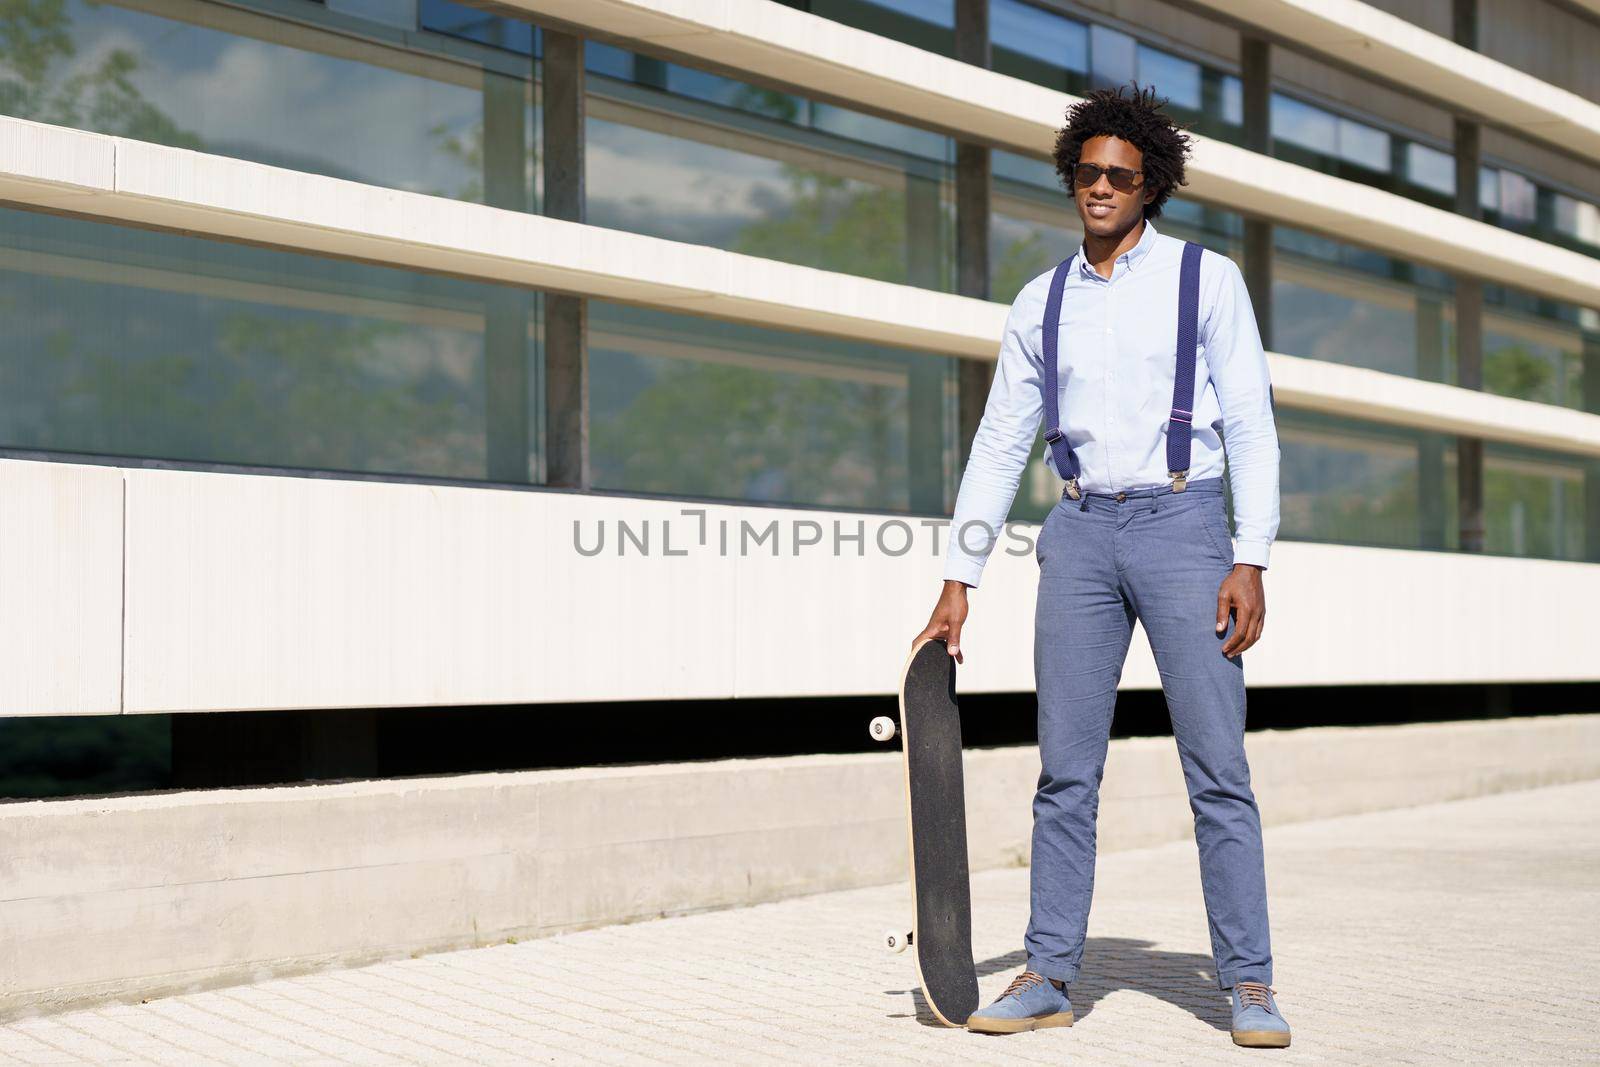 Black male worker with afro hairstyle standing next to an office building with a skateboard and sunglasses.